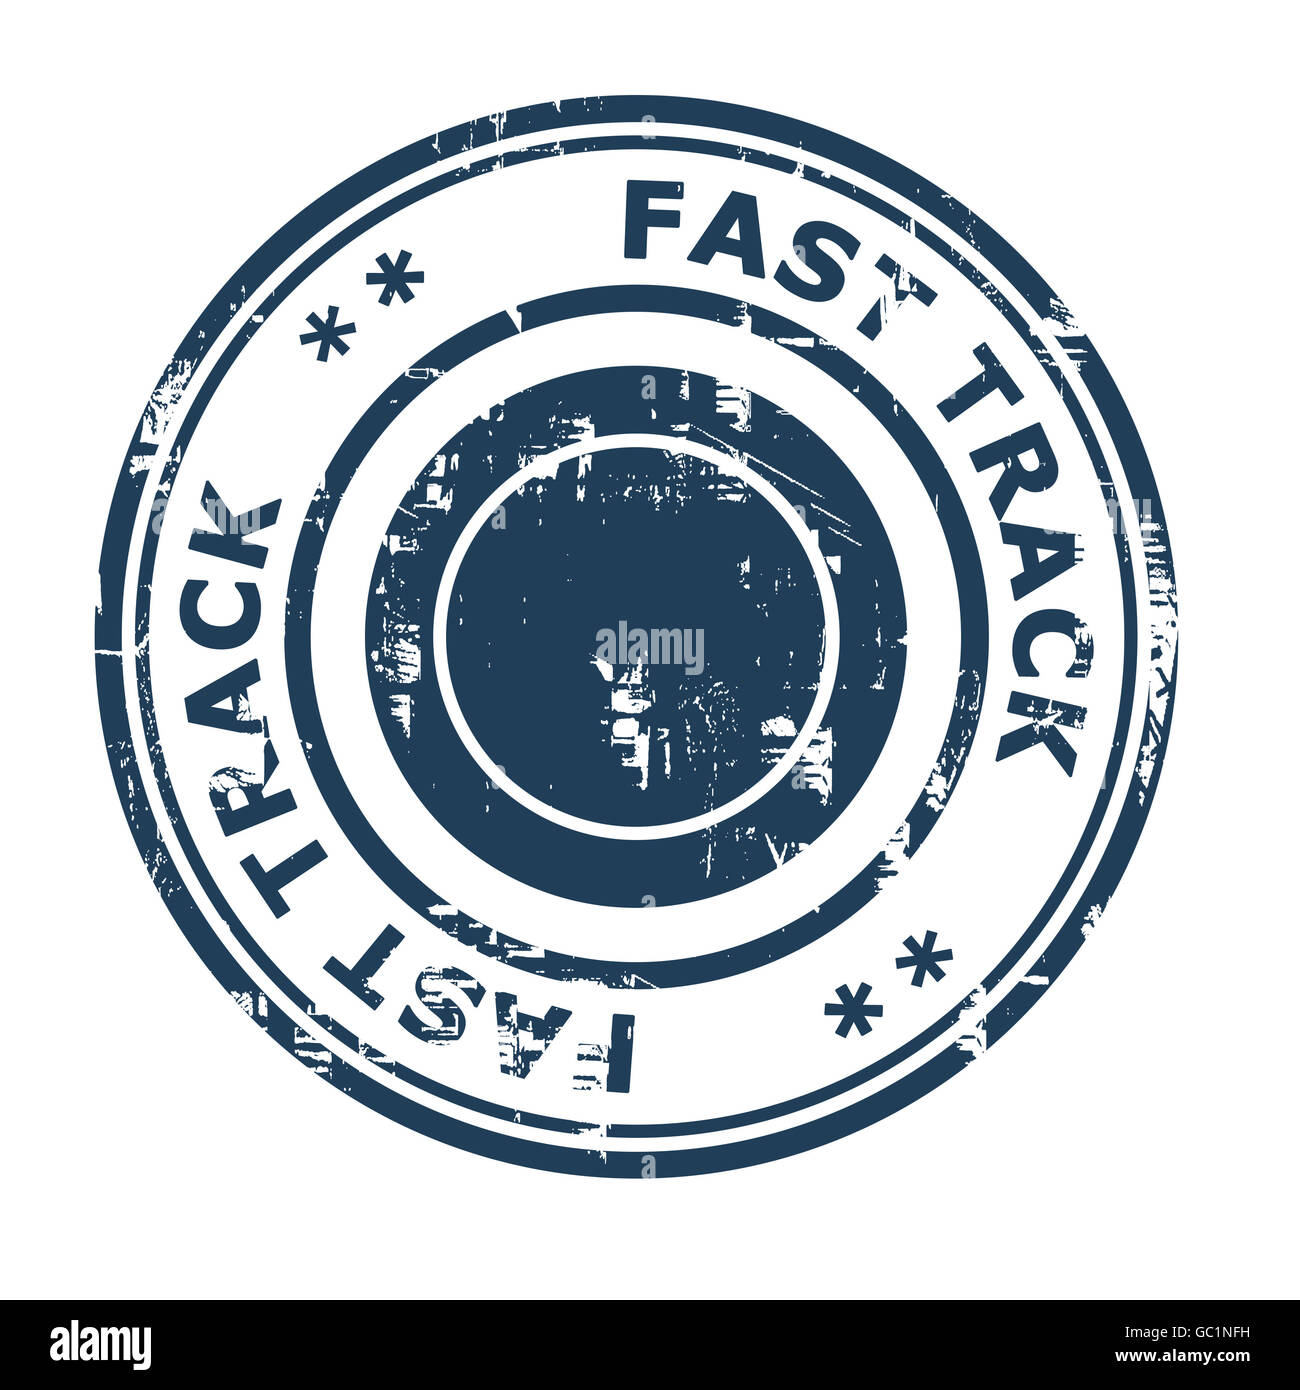 Fast track business concept rubber stamp isolated on a white background. Stock Photo